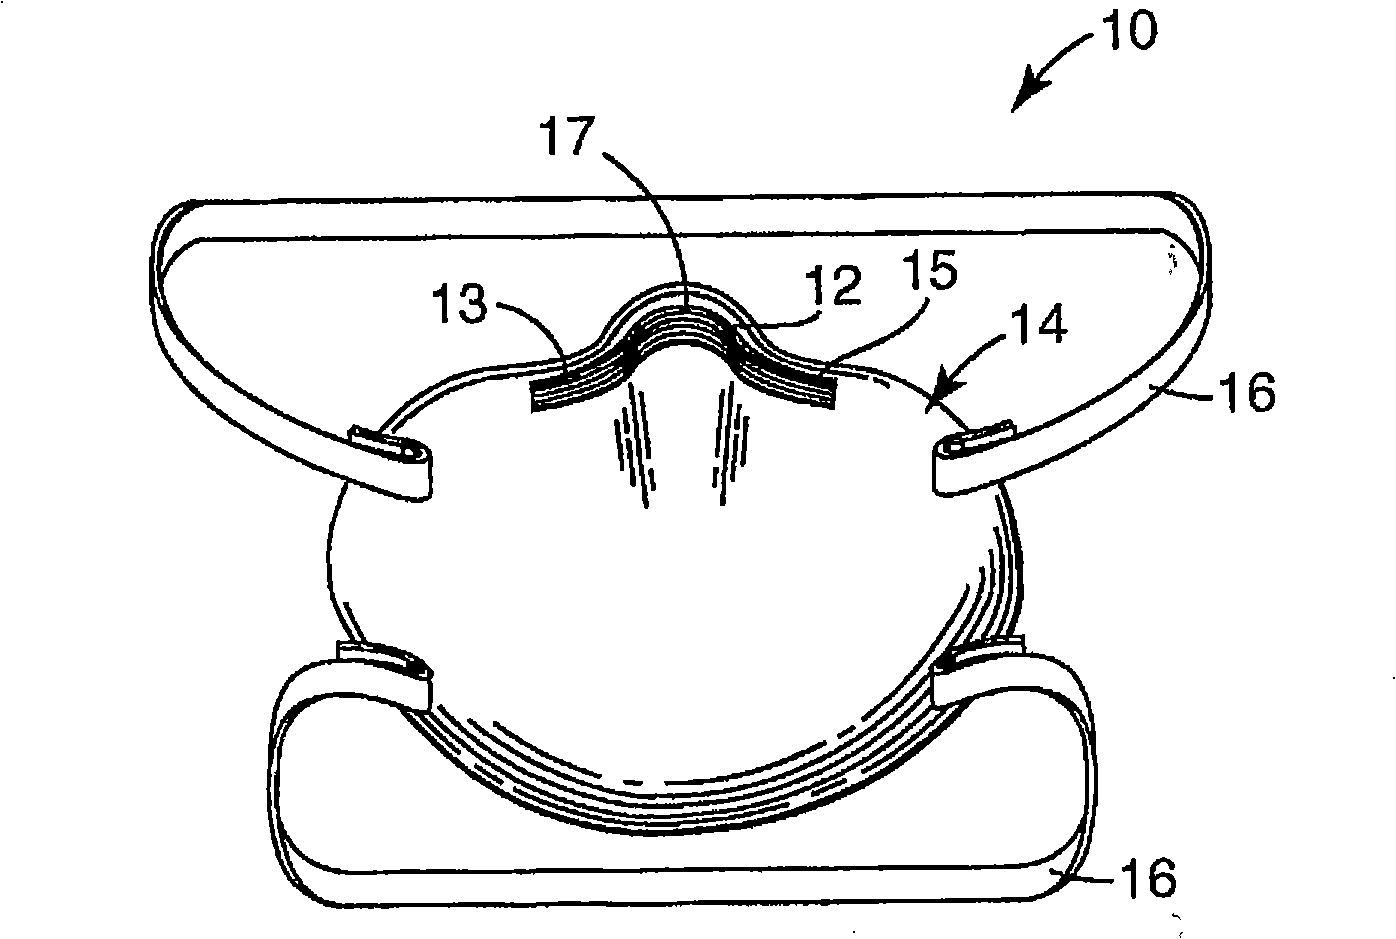 Respirator that uses a polymeric nose clip